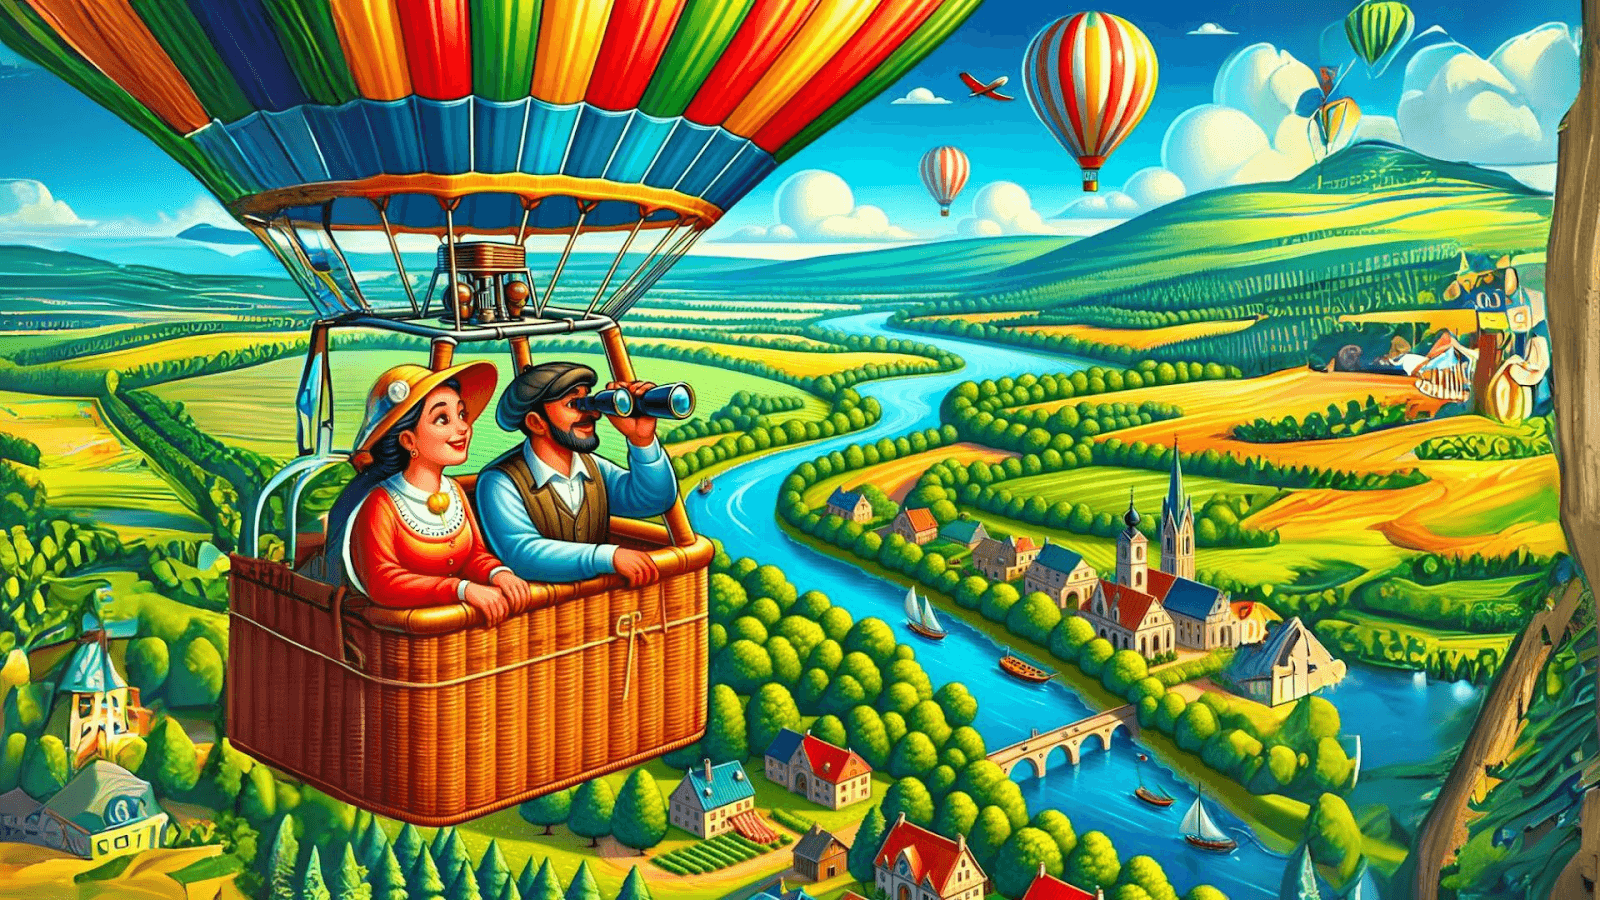 Illustration of a vintage, brightly colored hot air balloon floating above a picturesque landscape